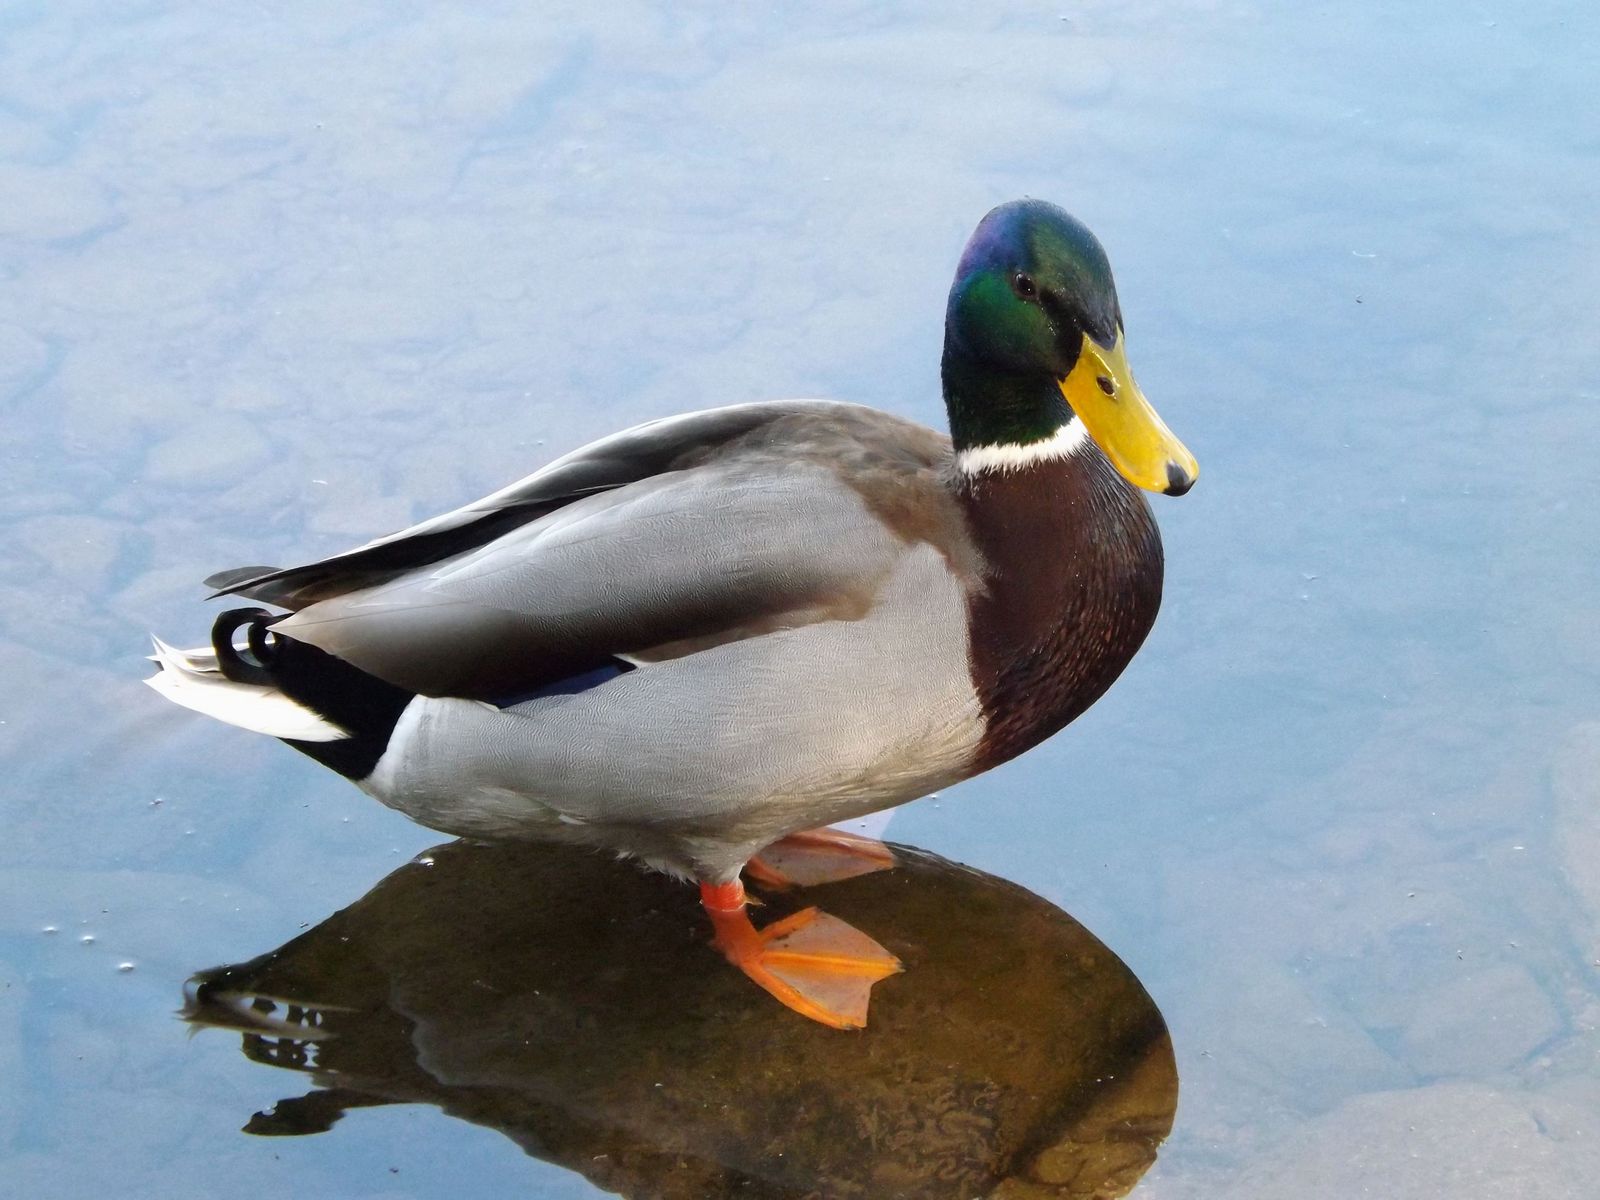 the duck has yellow feet, and it is standing on a rock in the water